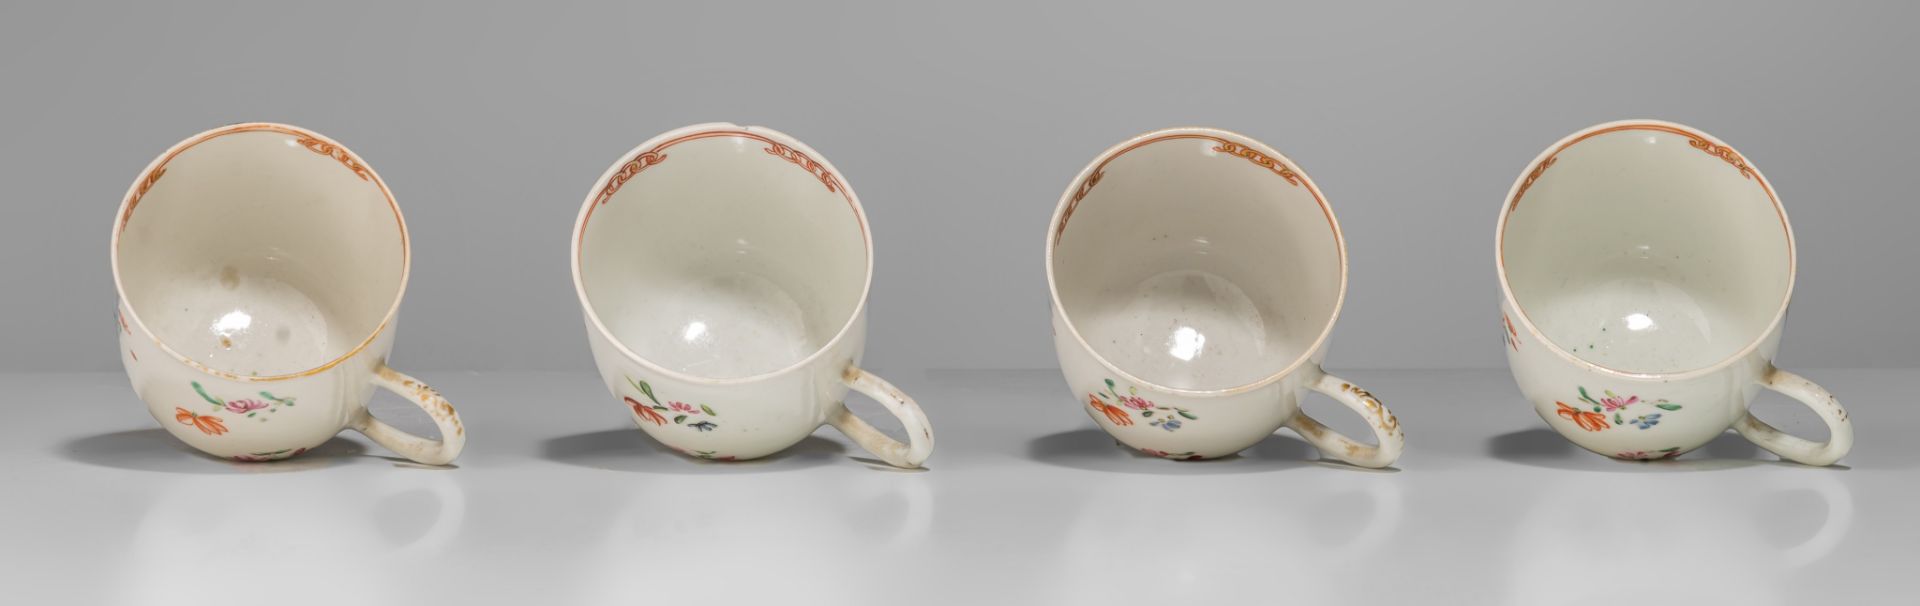 A collection of famille rose and gilt decorated export porcelain ware, 18thC, largest - H 12,5 - 34, - Image 19 of 20